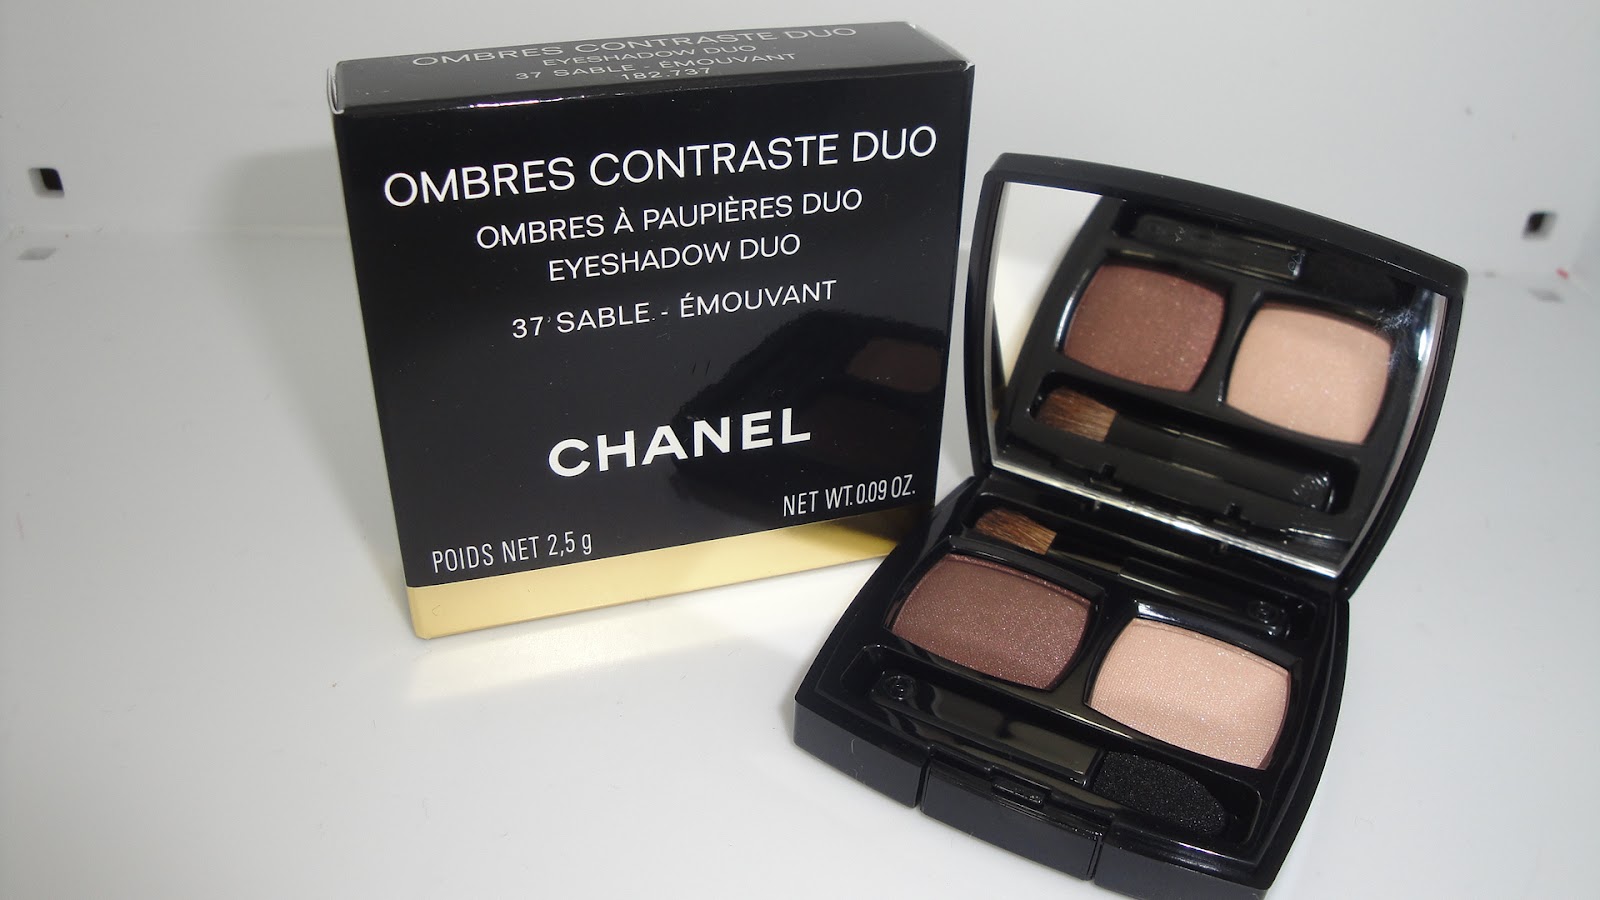 Jayded Dreaming Beauty Blog : CHANEL OMBRES CONTRASTE EYESHADOW DUO: #37  SABLE - EMOUVANT